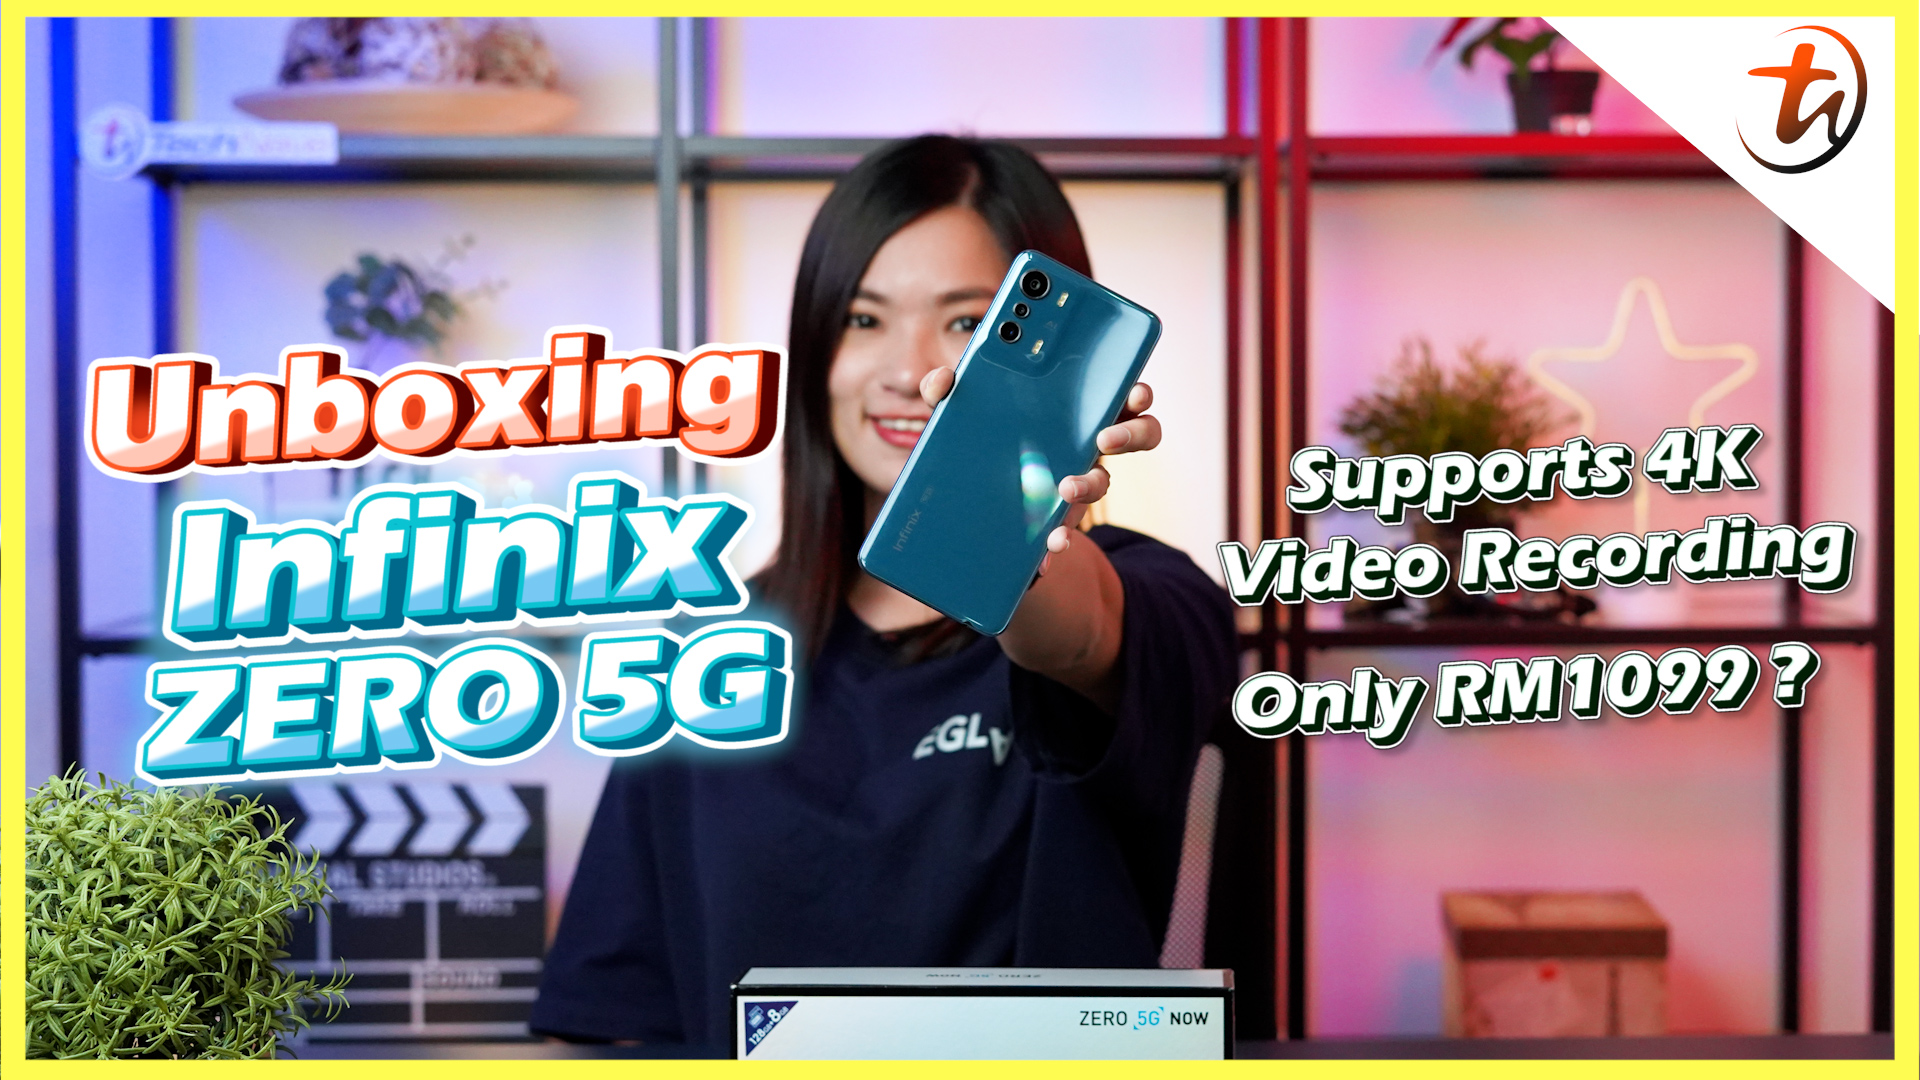 Infinix ZERO 5G - New Budget Killer! | TechNave Unboxing and Hands-On Video